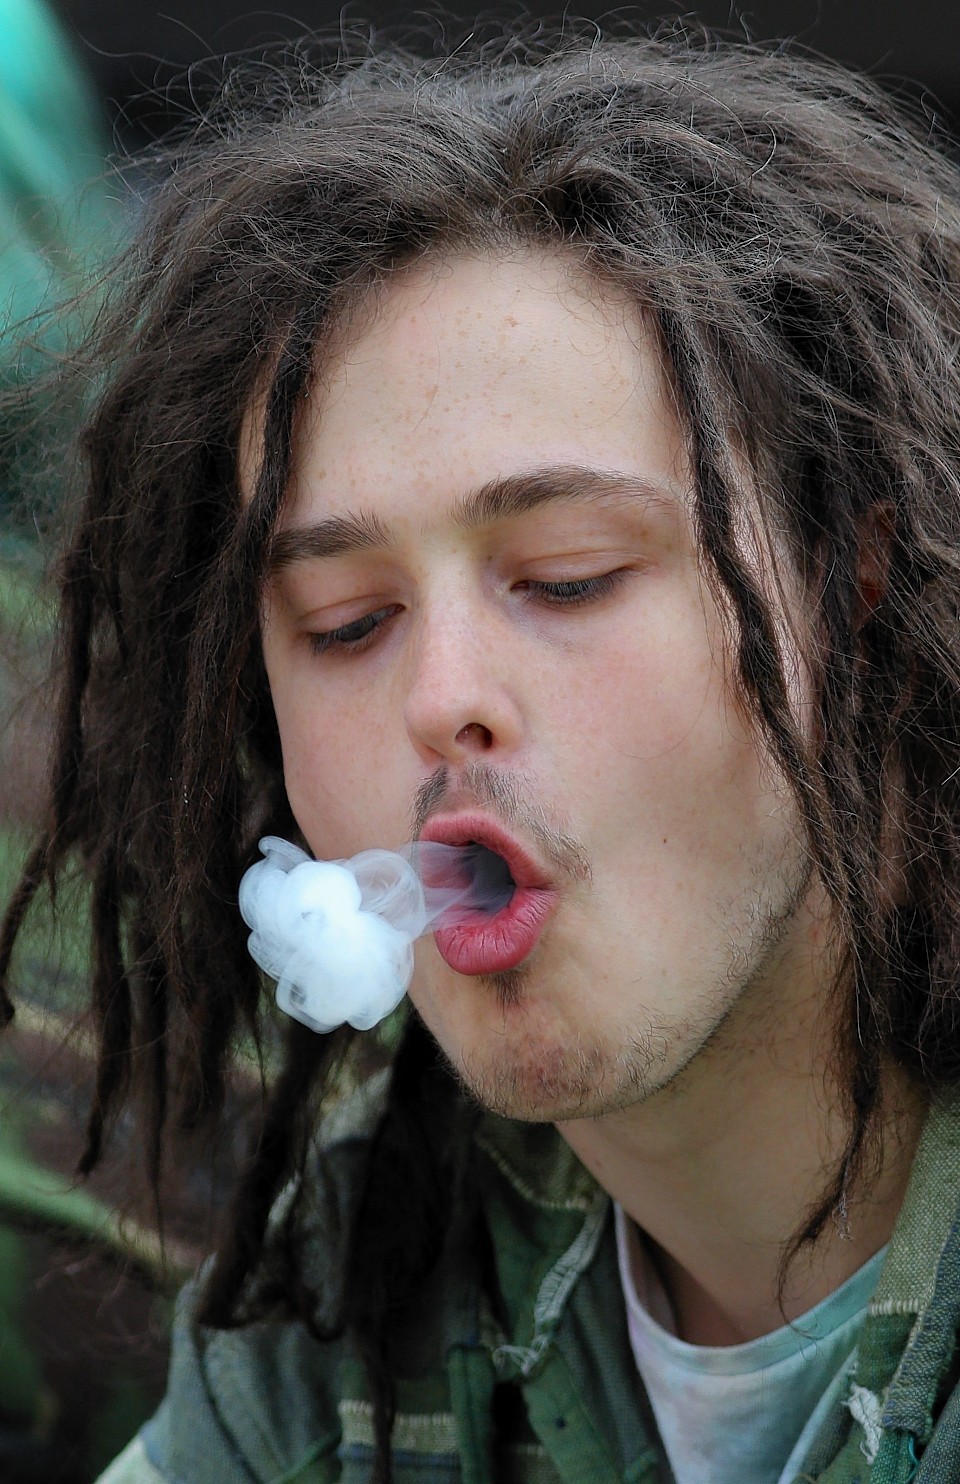 Hundreds of people came together for the 420 Cannabis Celebrations in George Square in Glasgow